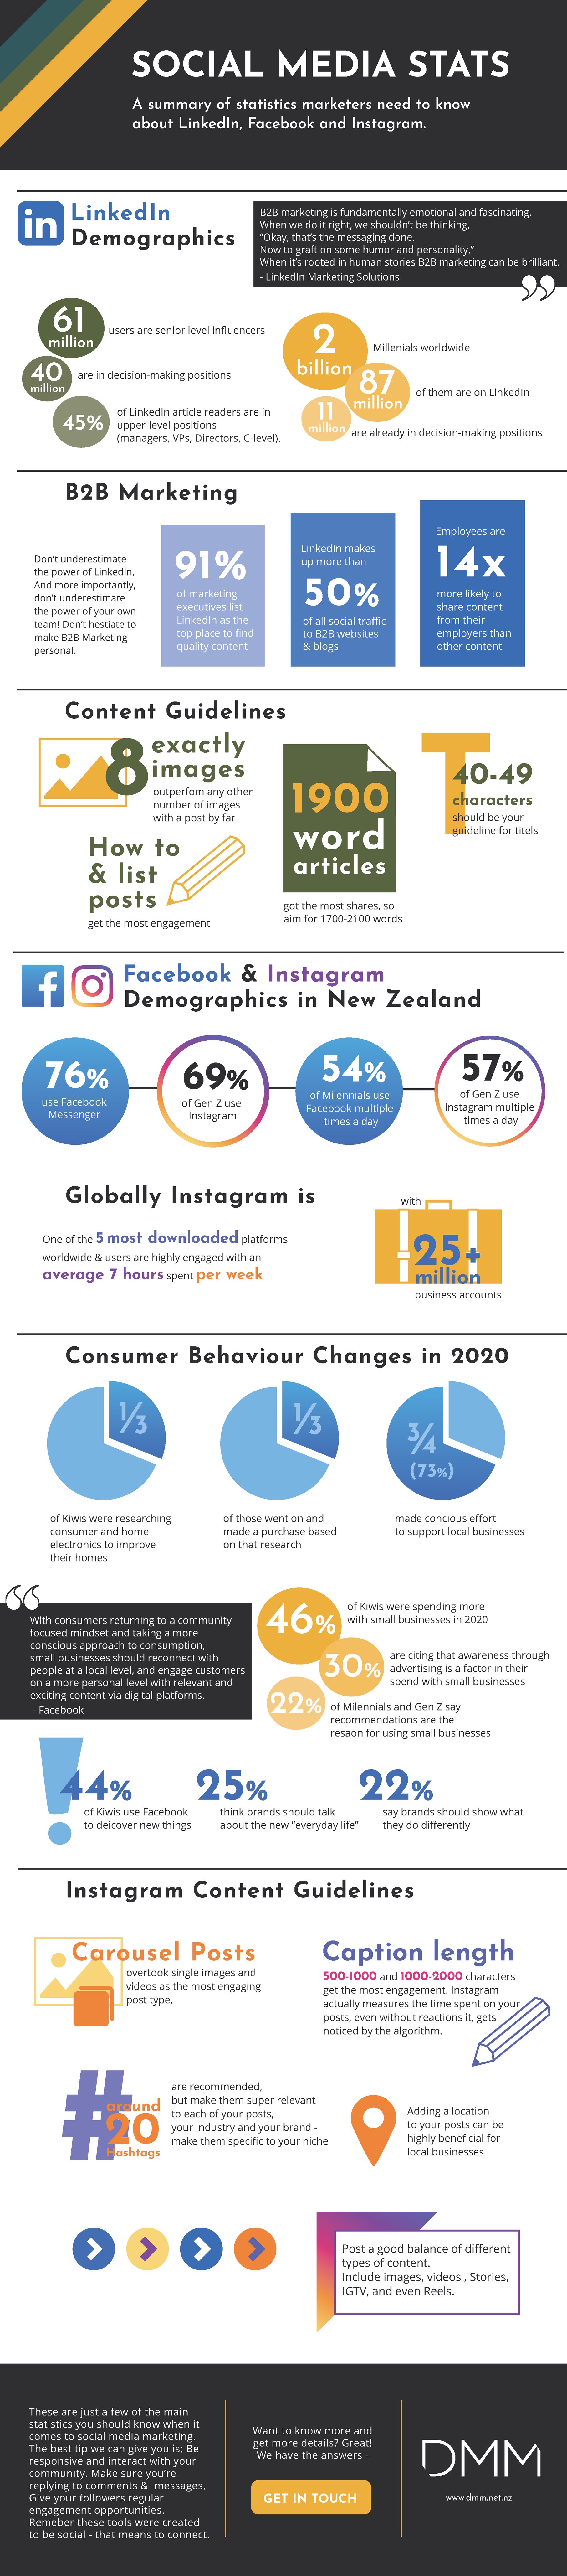 Social Media Stats every Marketer should know [Infographic]